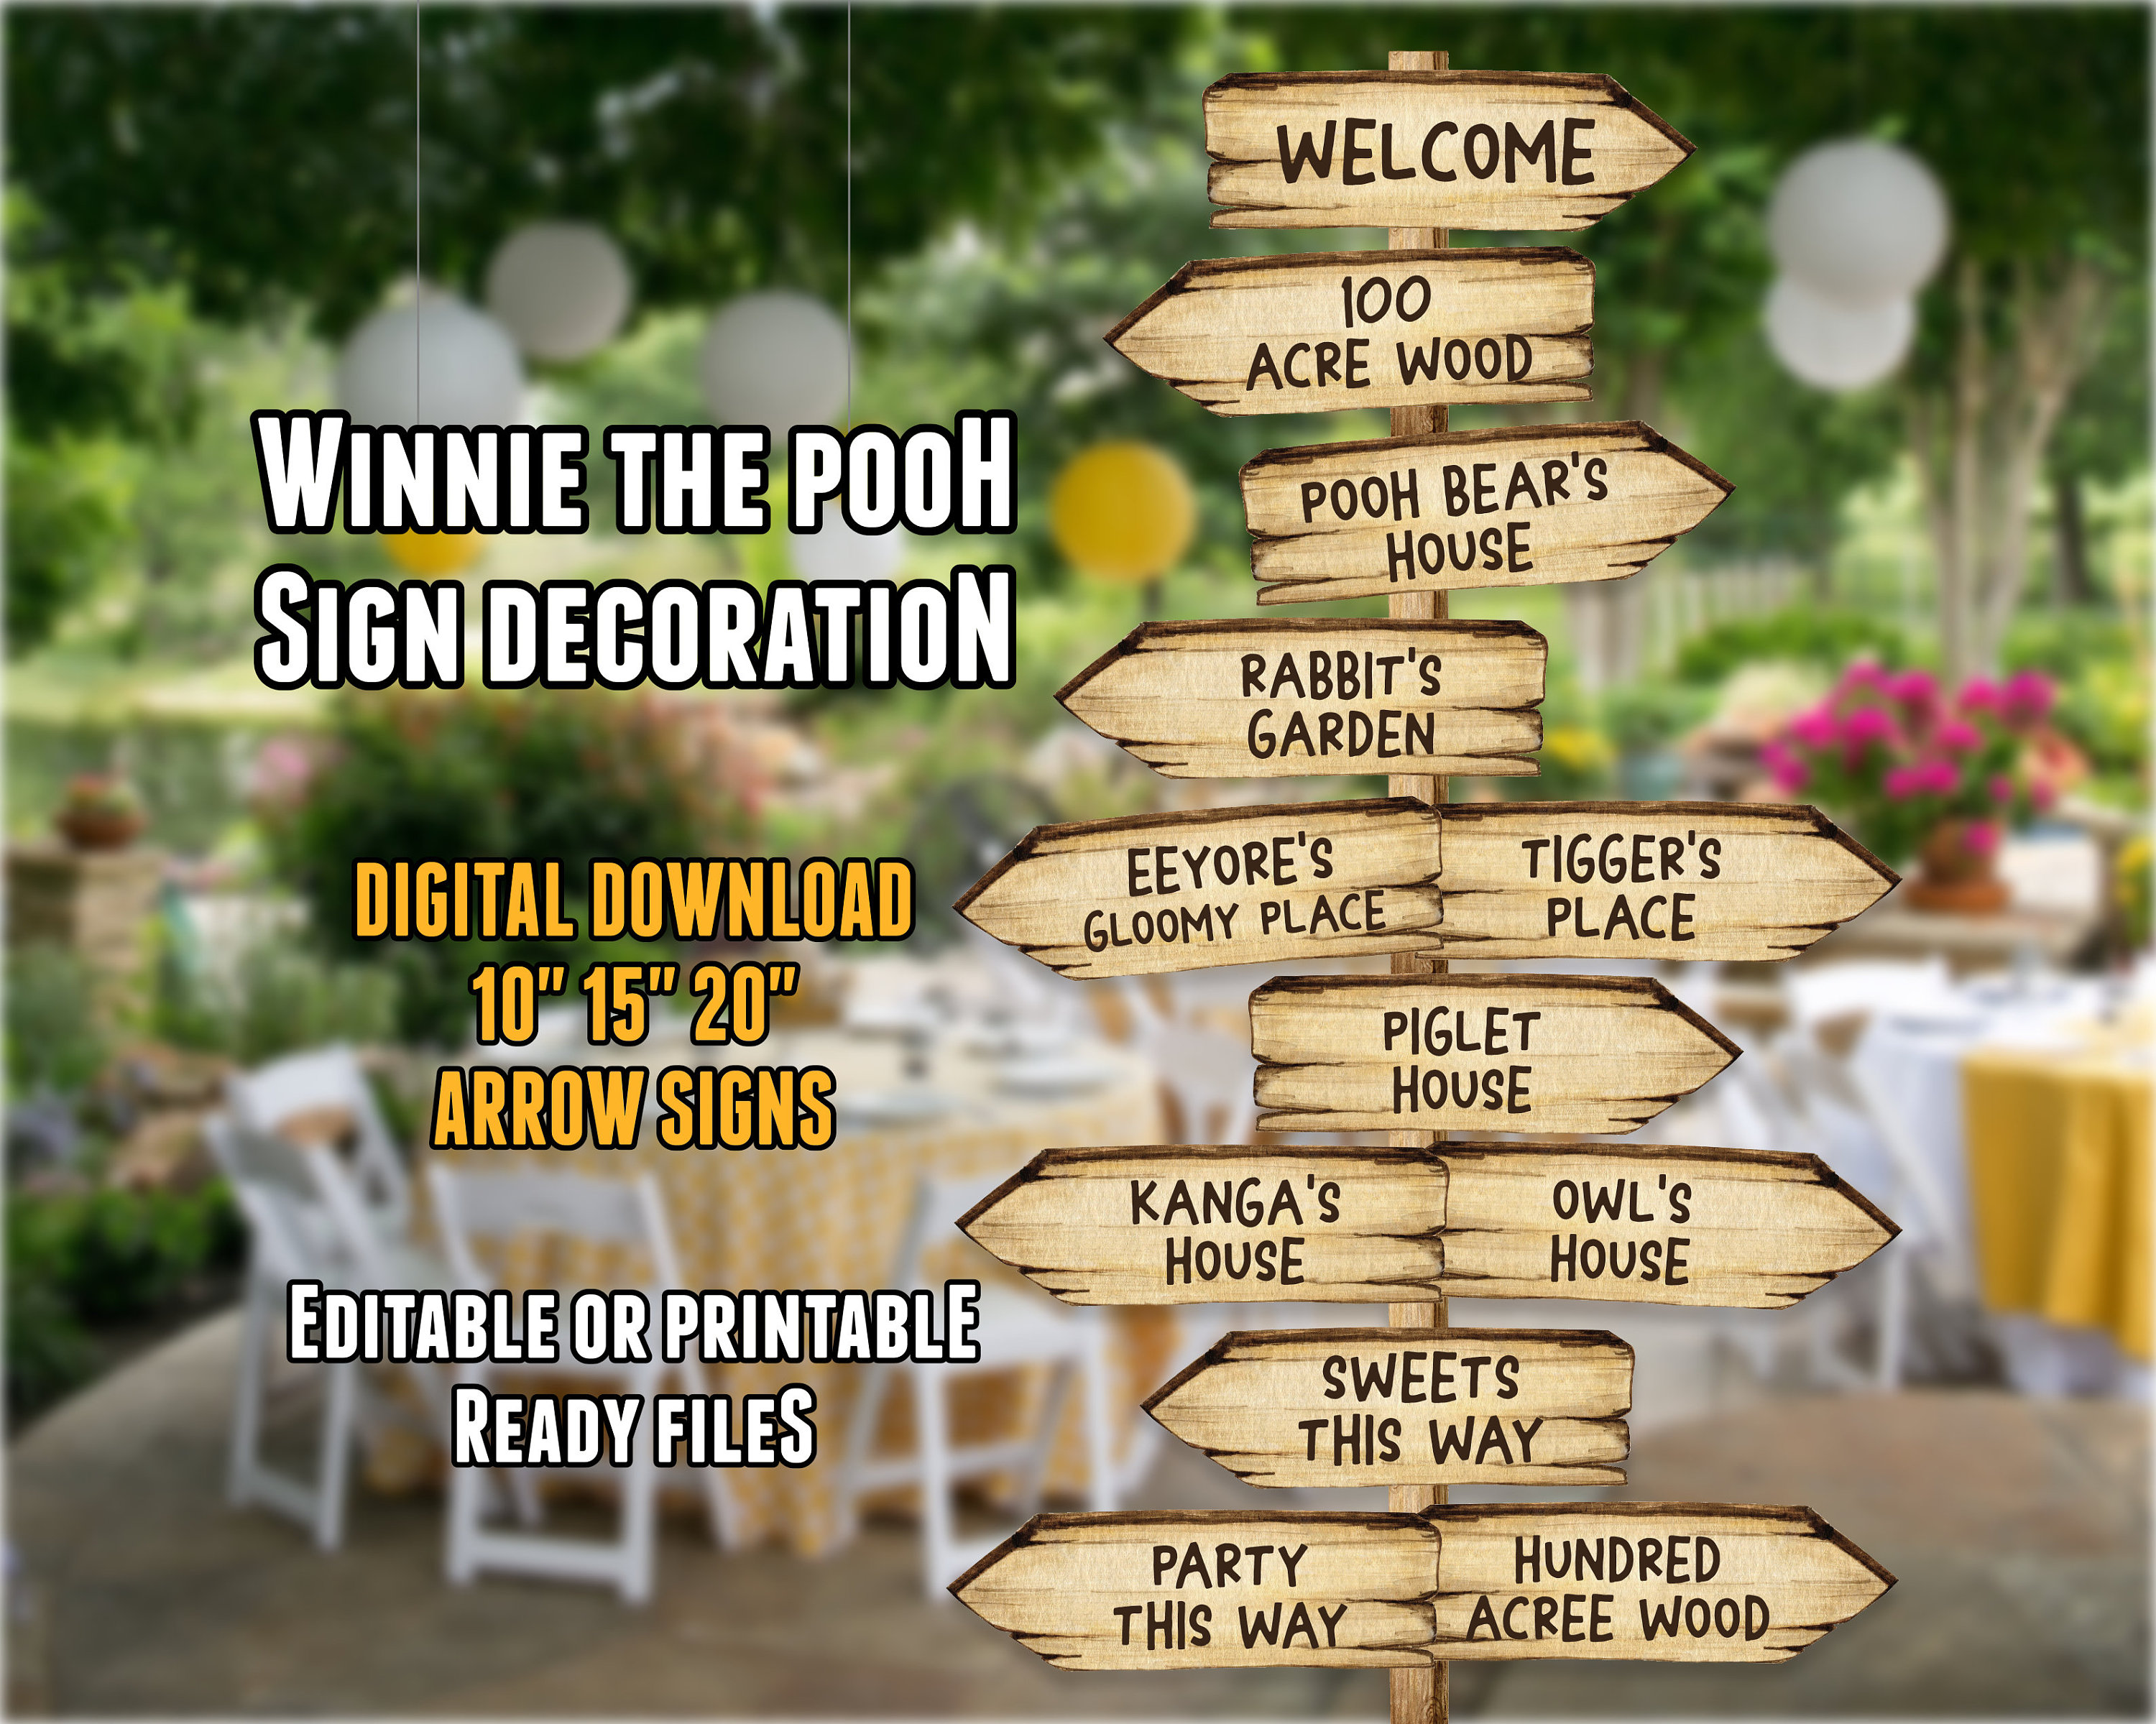 Classic Winnie The Pooh Baby Shower Games - What's On Your Phone - Blu –  spikes.digitalshop